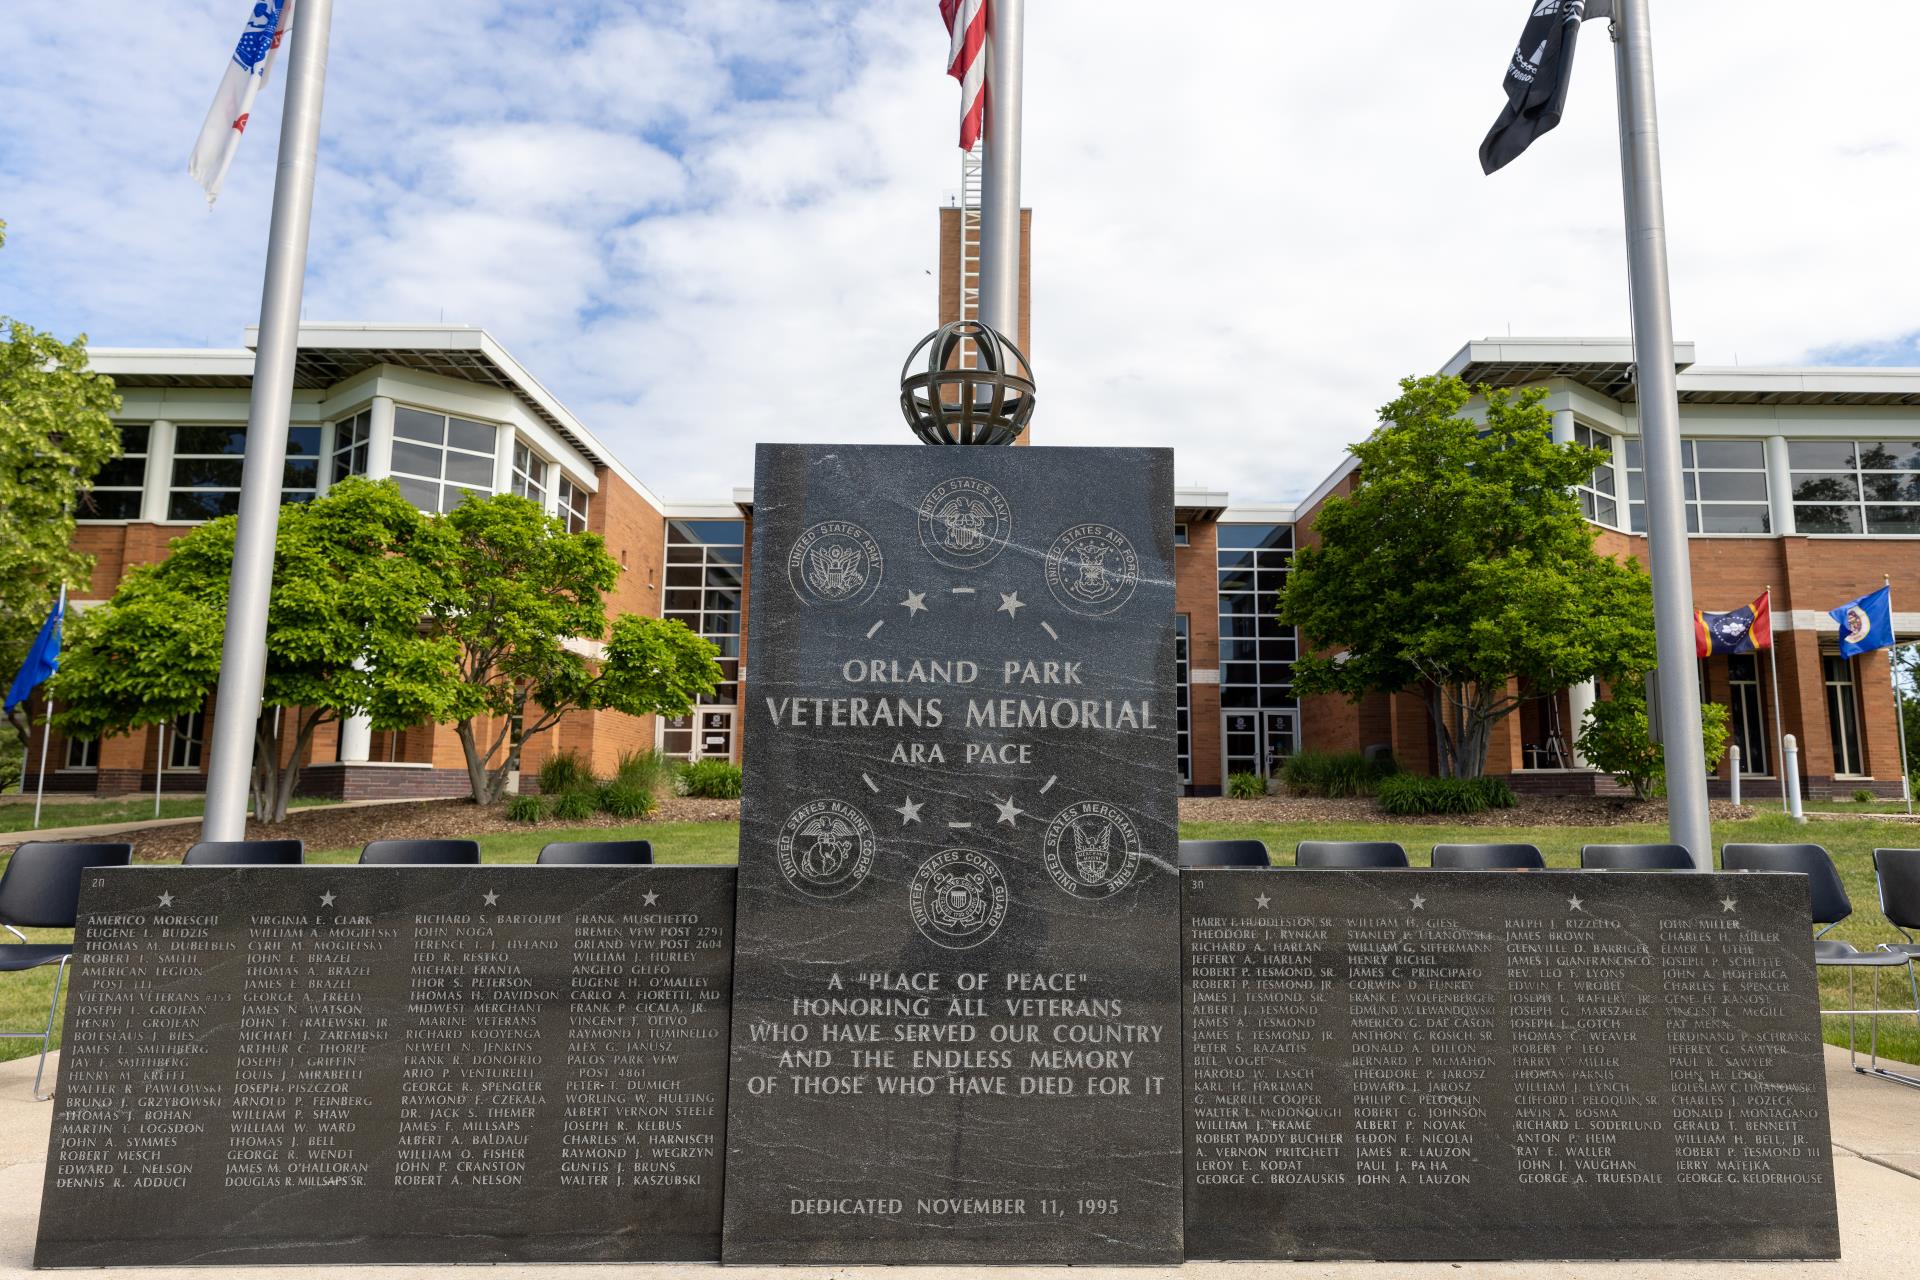 Village of Orland Park to Host Memorial Day Ceremony